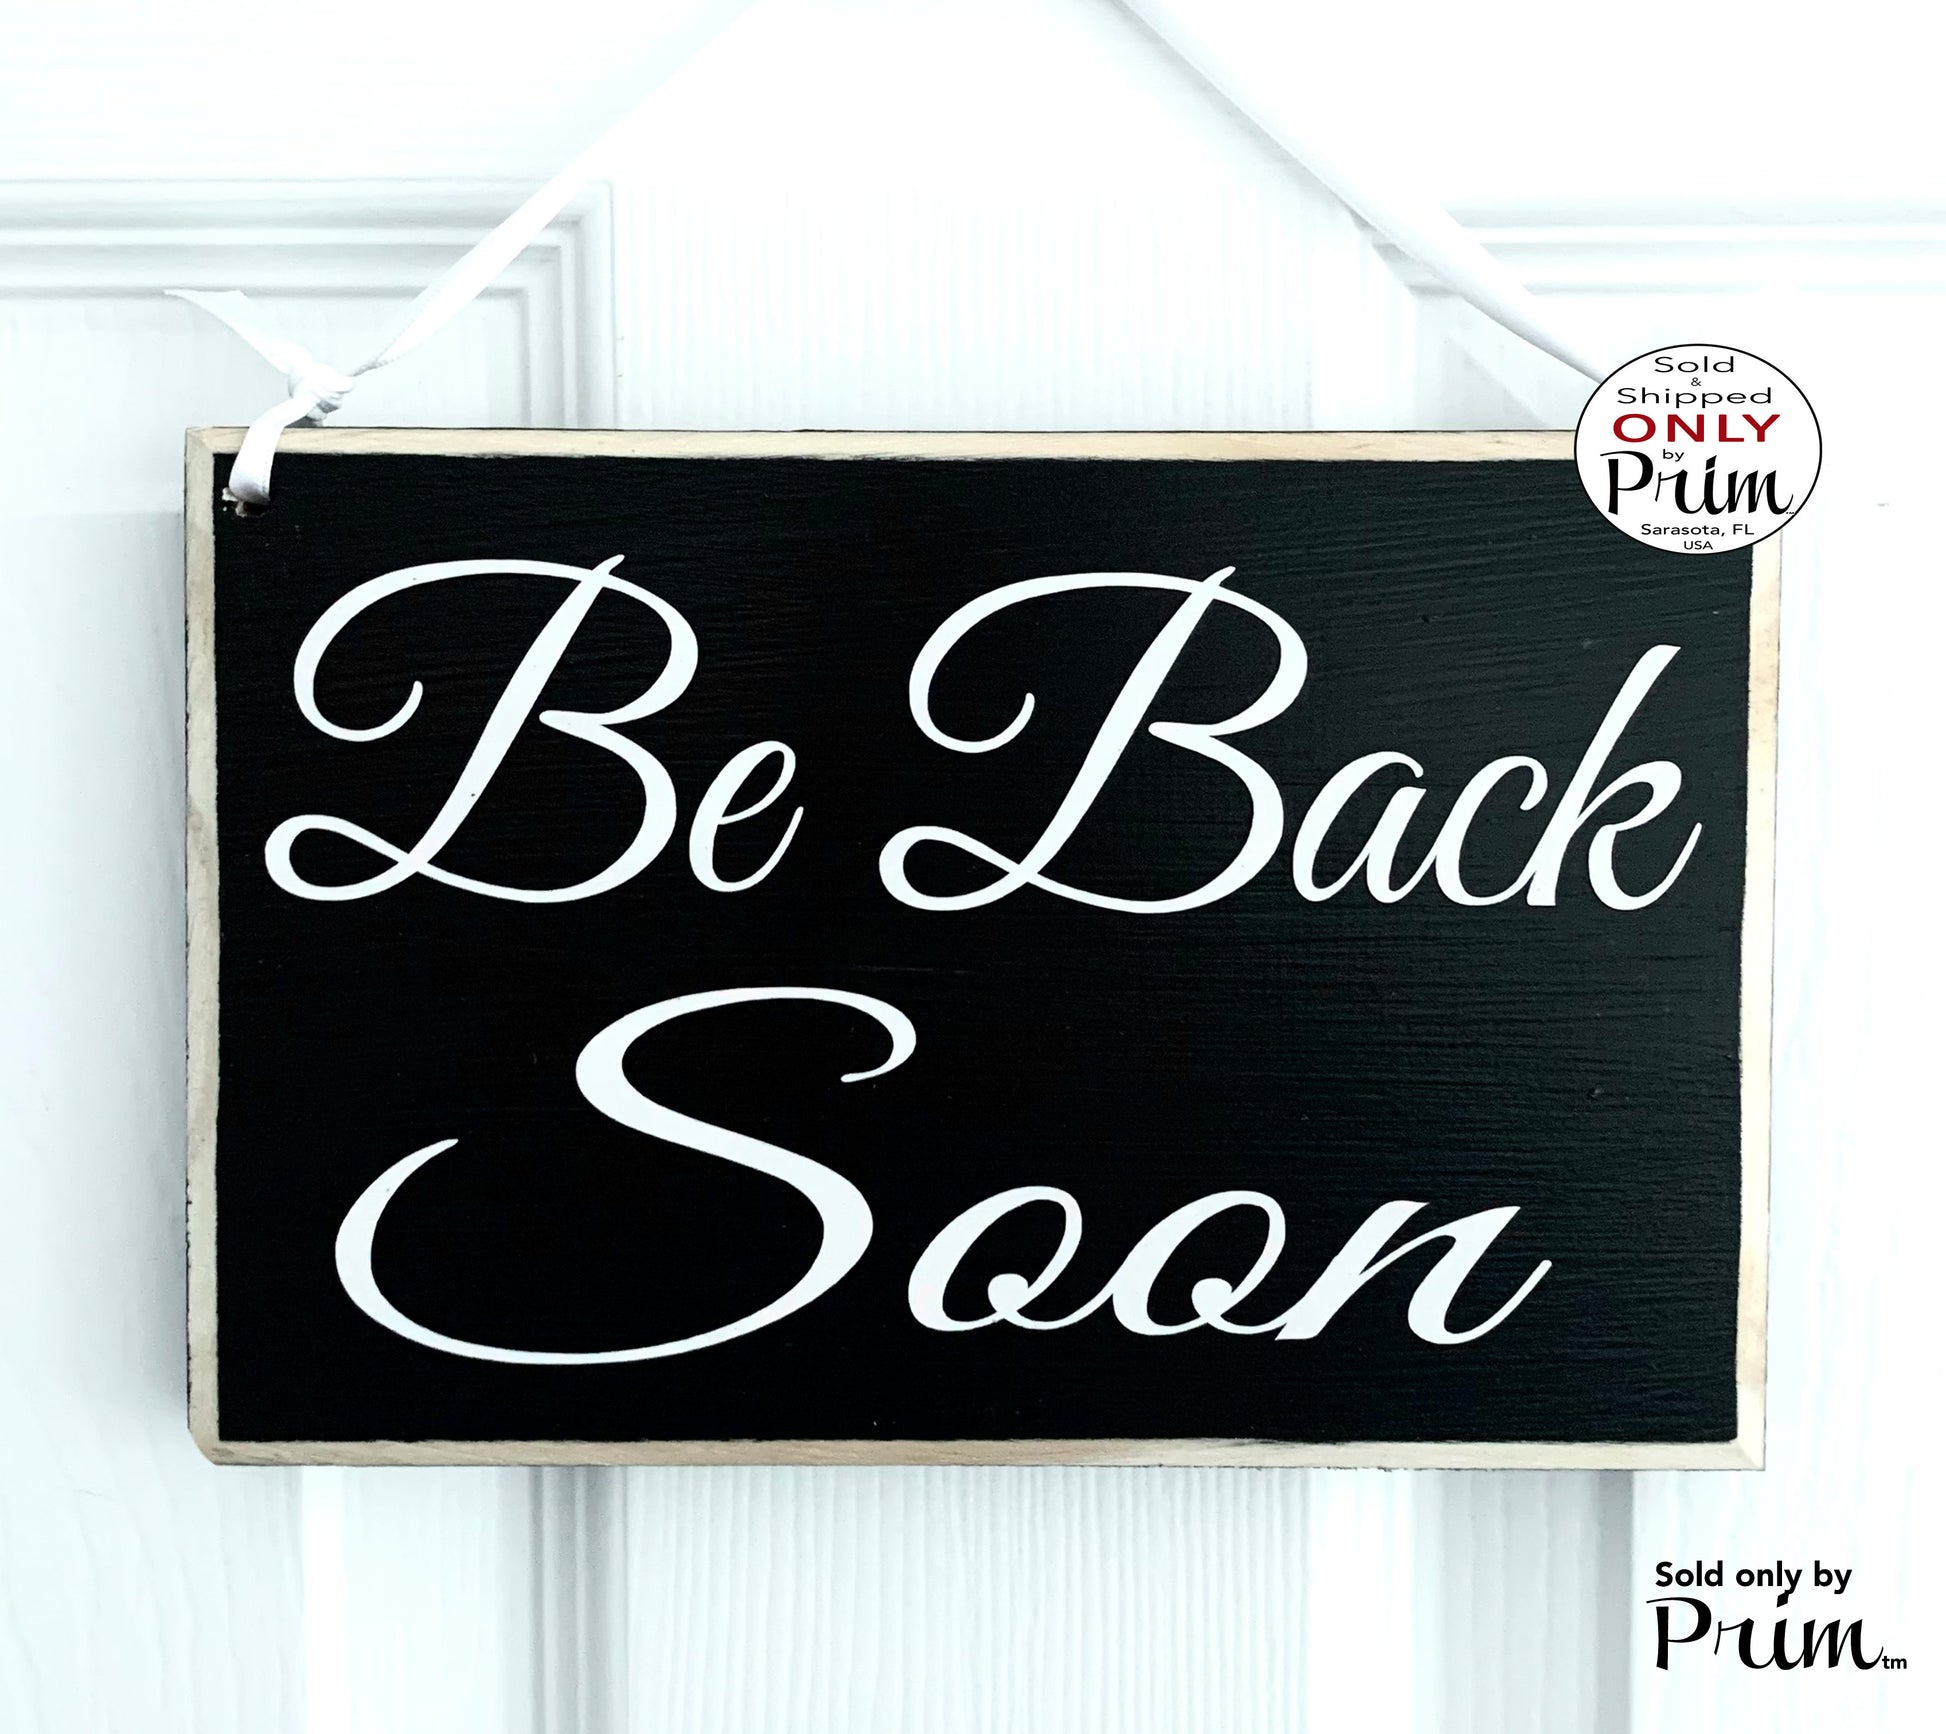 Designs by Prim 8x6 Be Back Shortly Custom Wood Sign I'll We'll Be Right Back Closed Come Soon Please Wait Unavailable Office Business Door Hanger Plaque